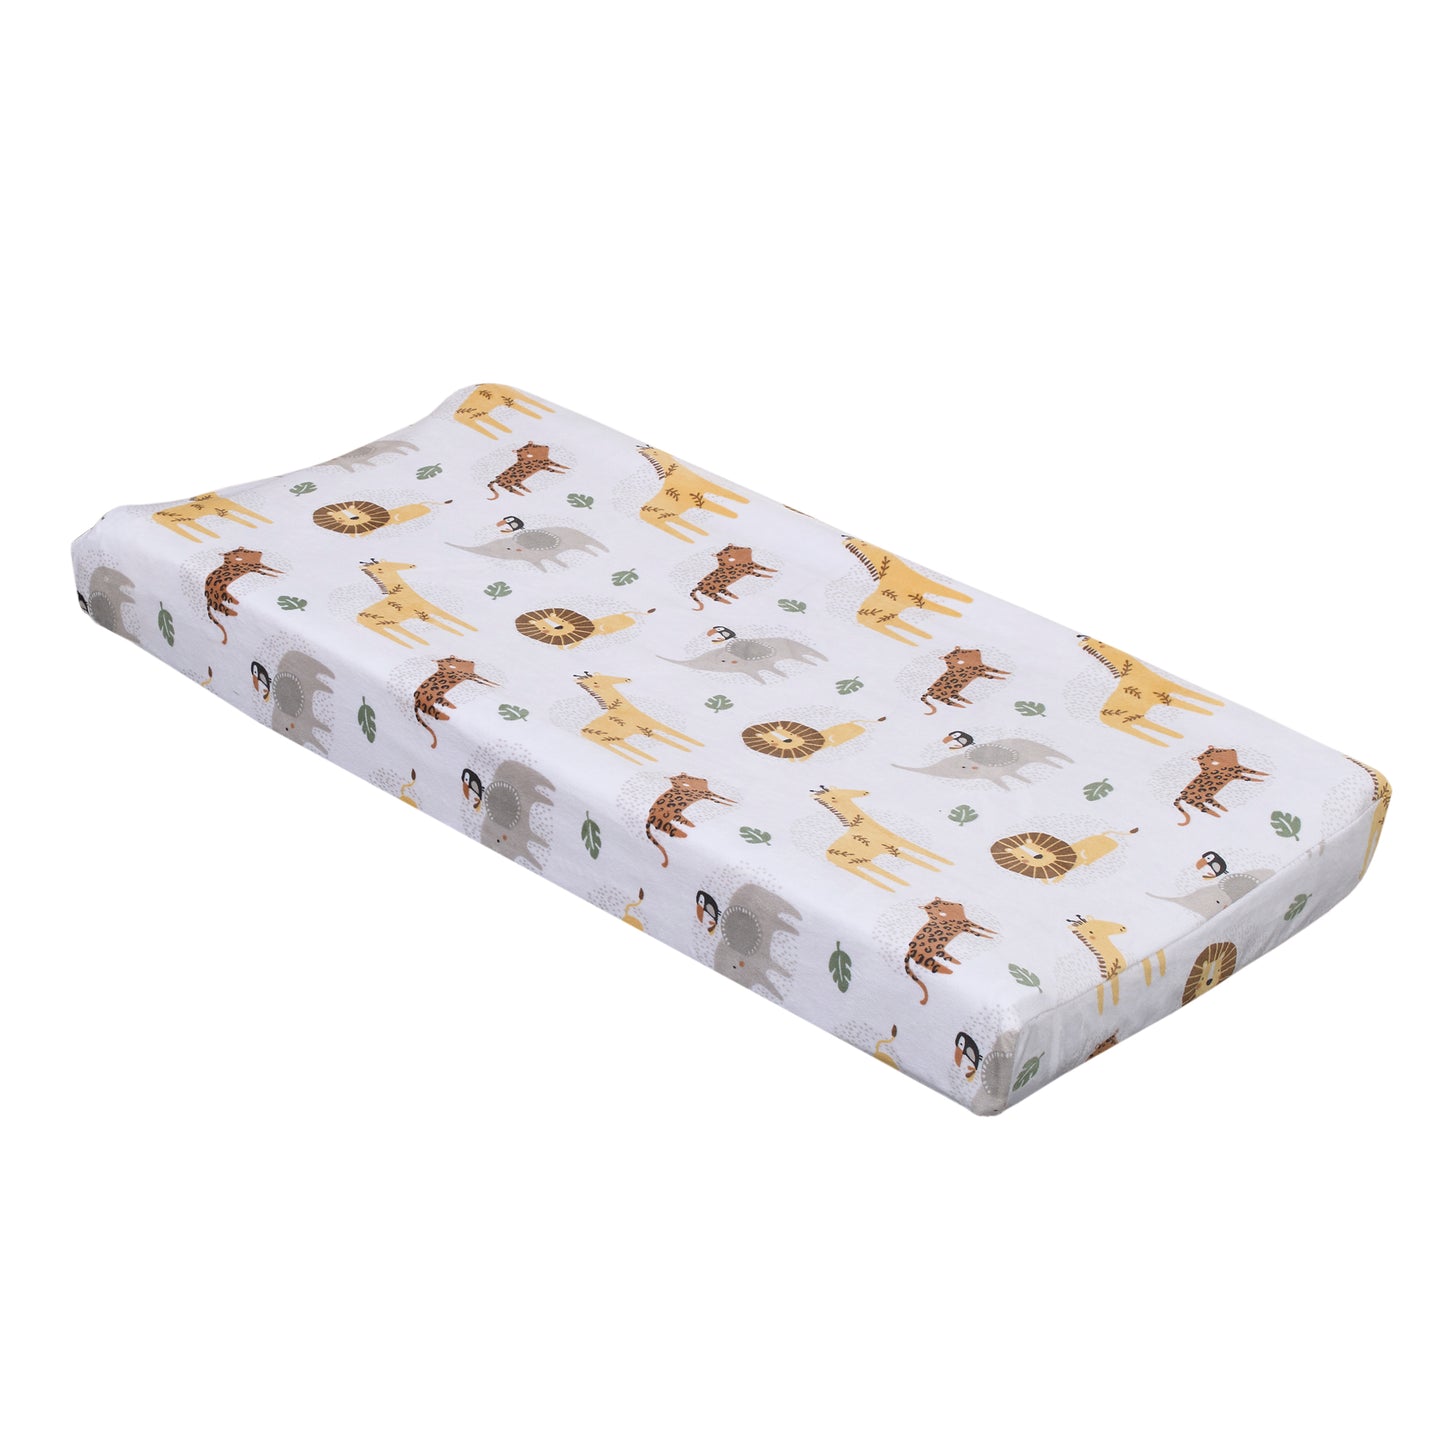 NoJo Jungle Trails Grey, Gold, Green and White Super Soft Animal Print Changing Pad Cover